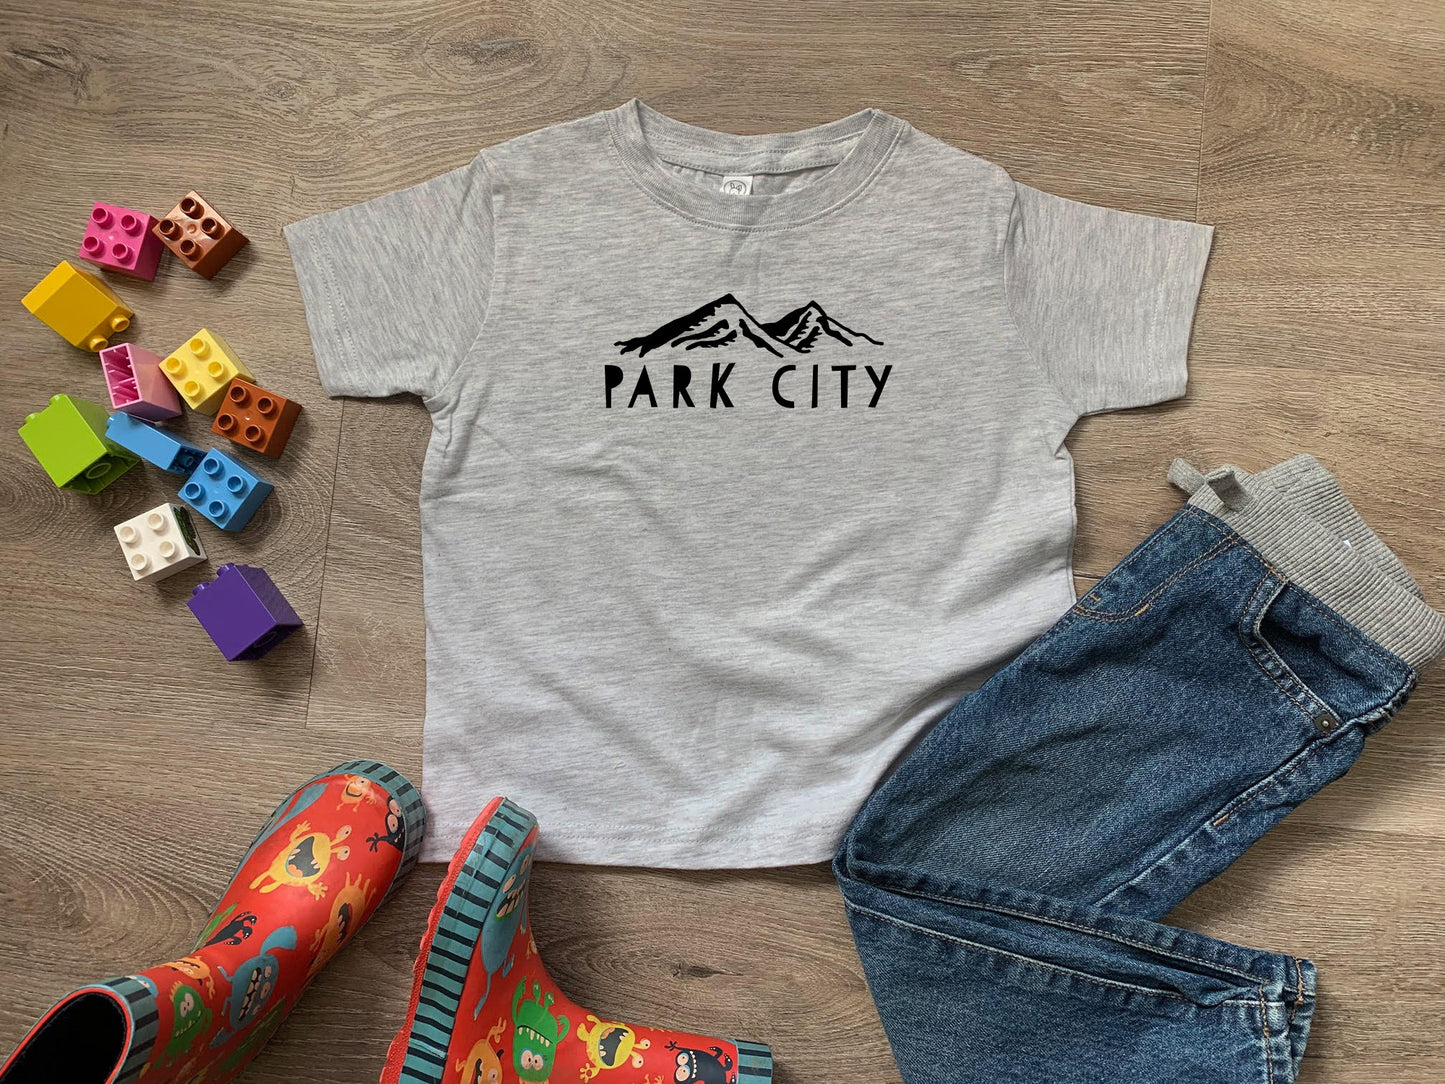 a t - shirt that says park city next to some toys